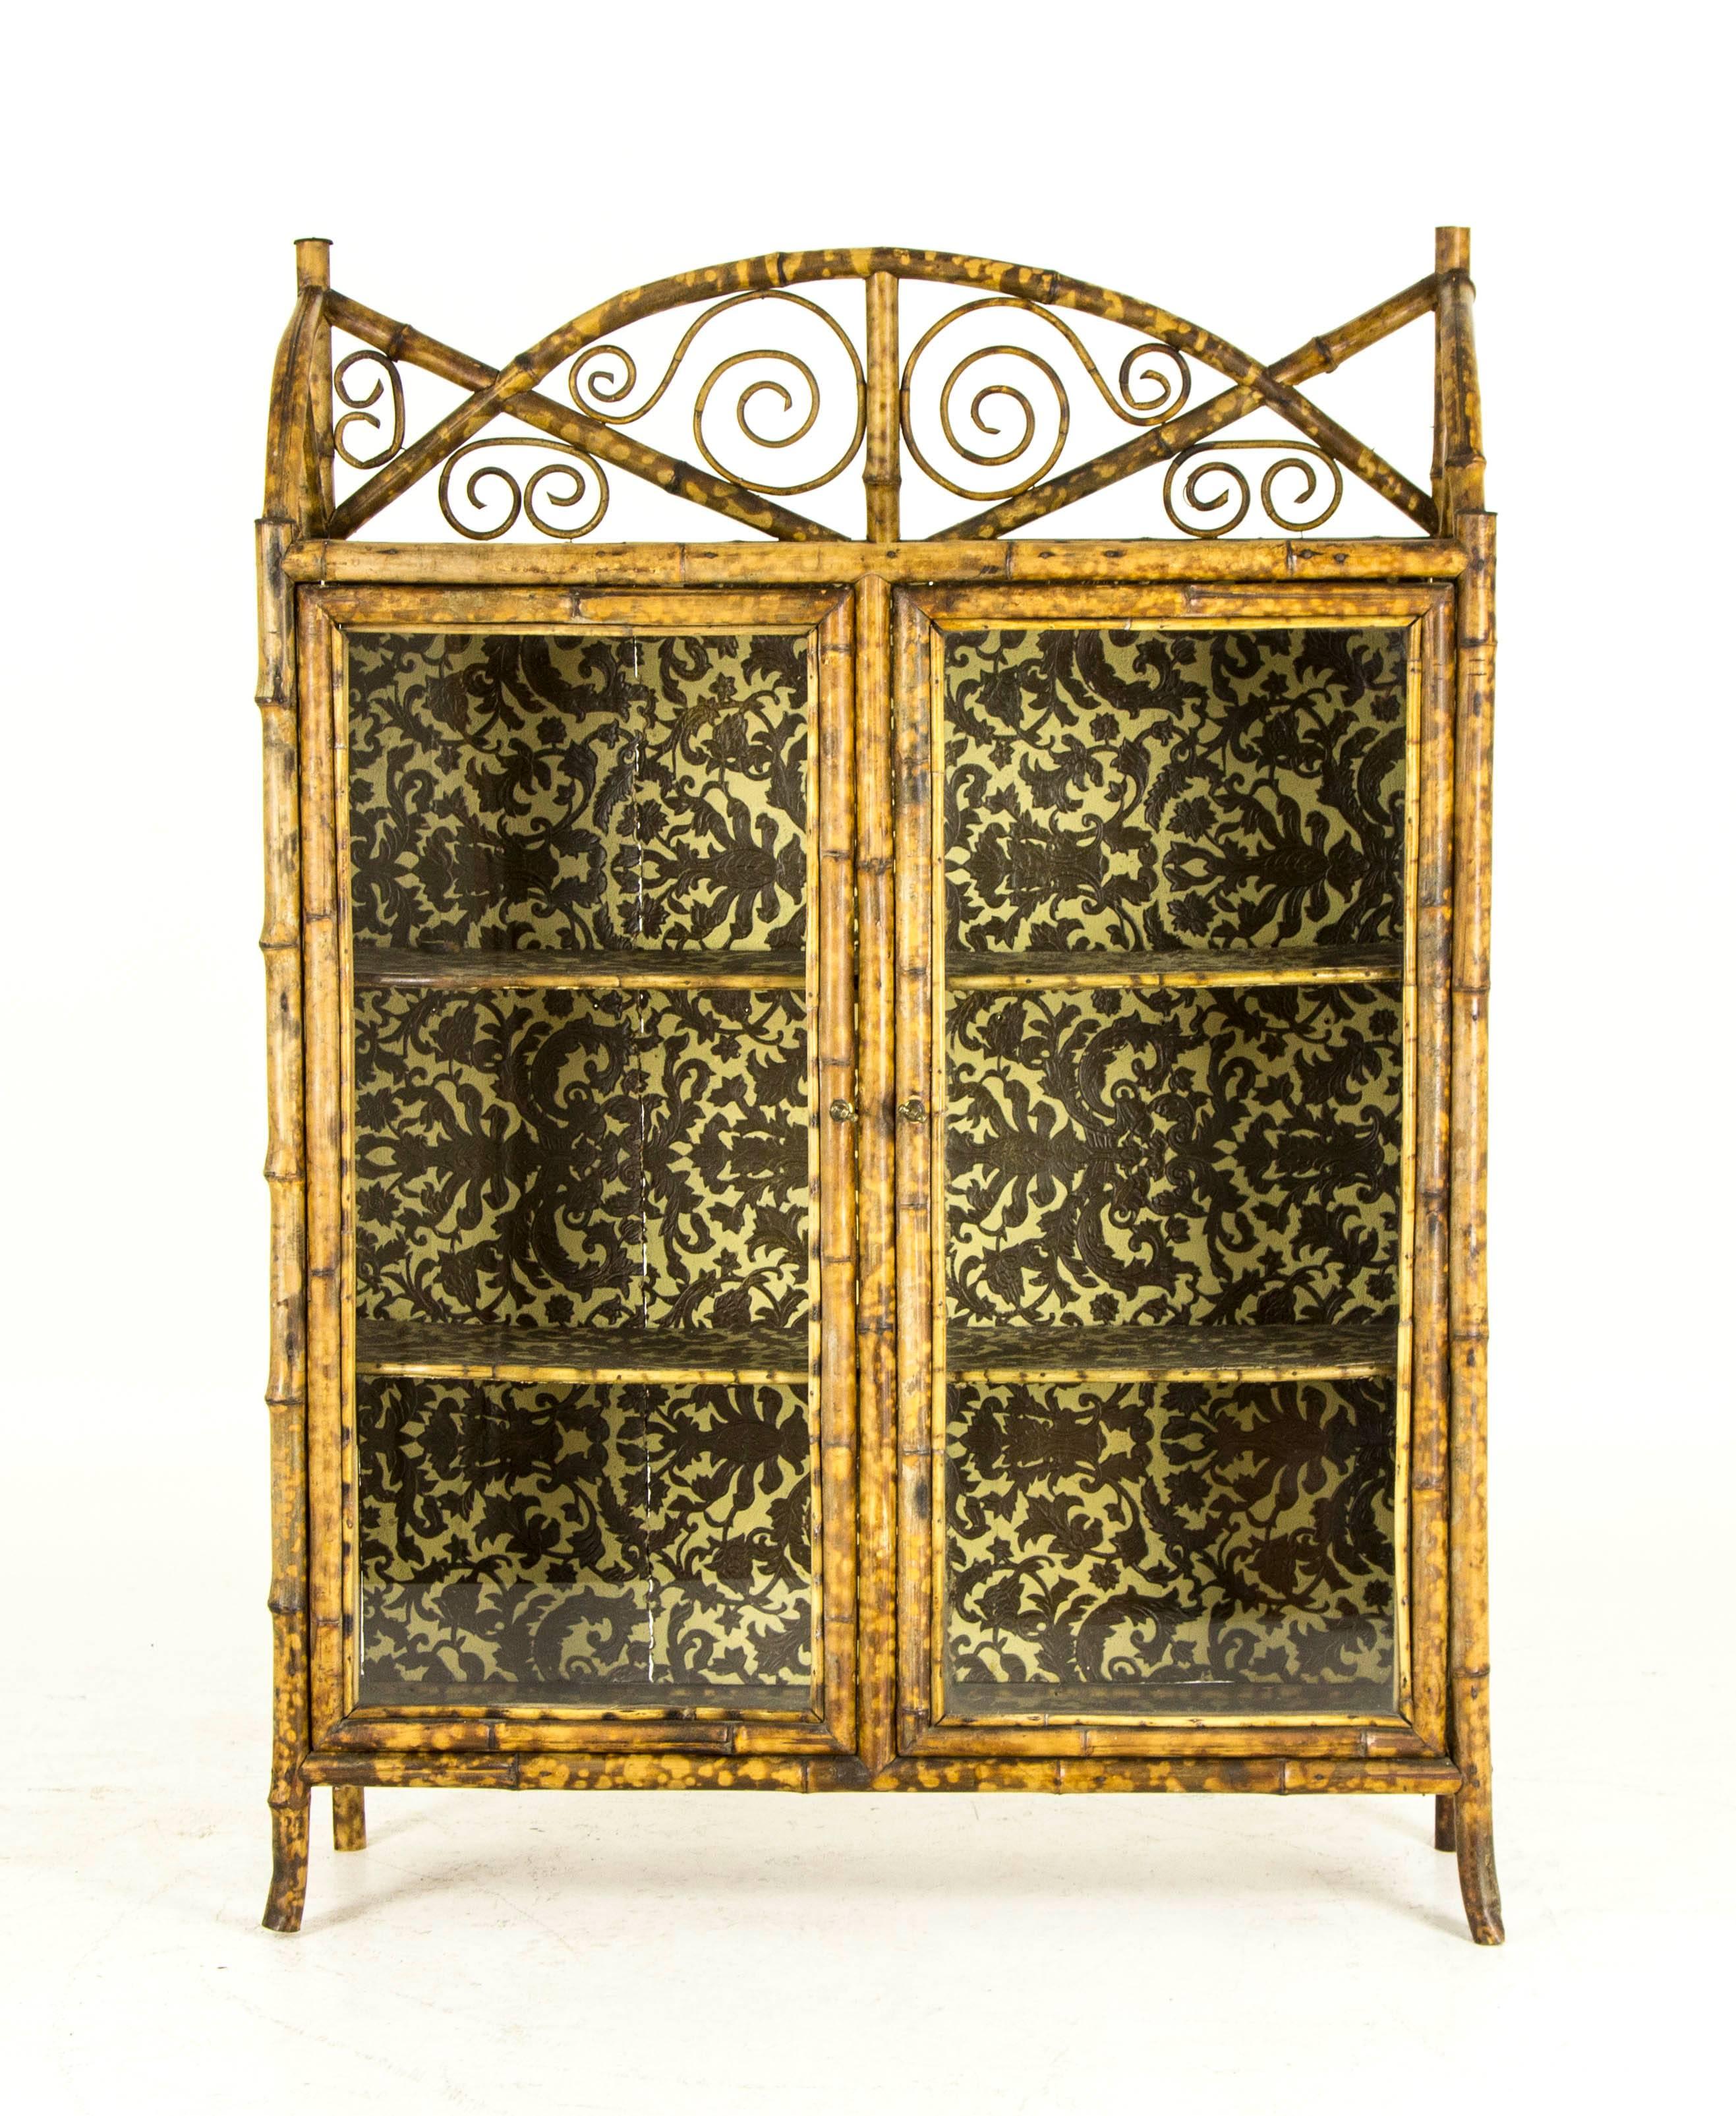 Scotland
1870
A good example in great condition
Victorians loved bamboo furniture
Three quarter gallery with accents
chinoiserie painted top above two glass doors opening to two fixed shelves
Ending on bamboo splayed legs
This bookcase